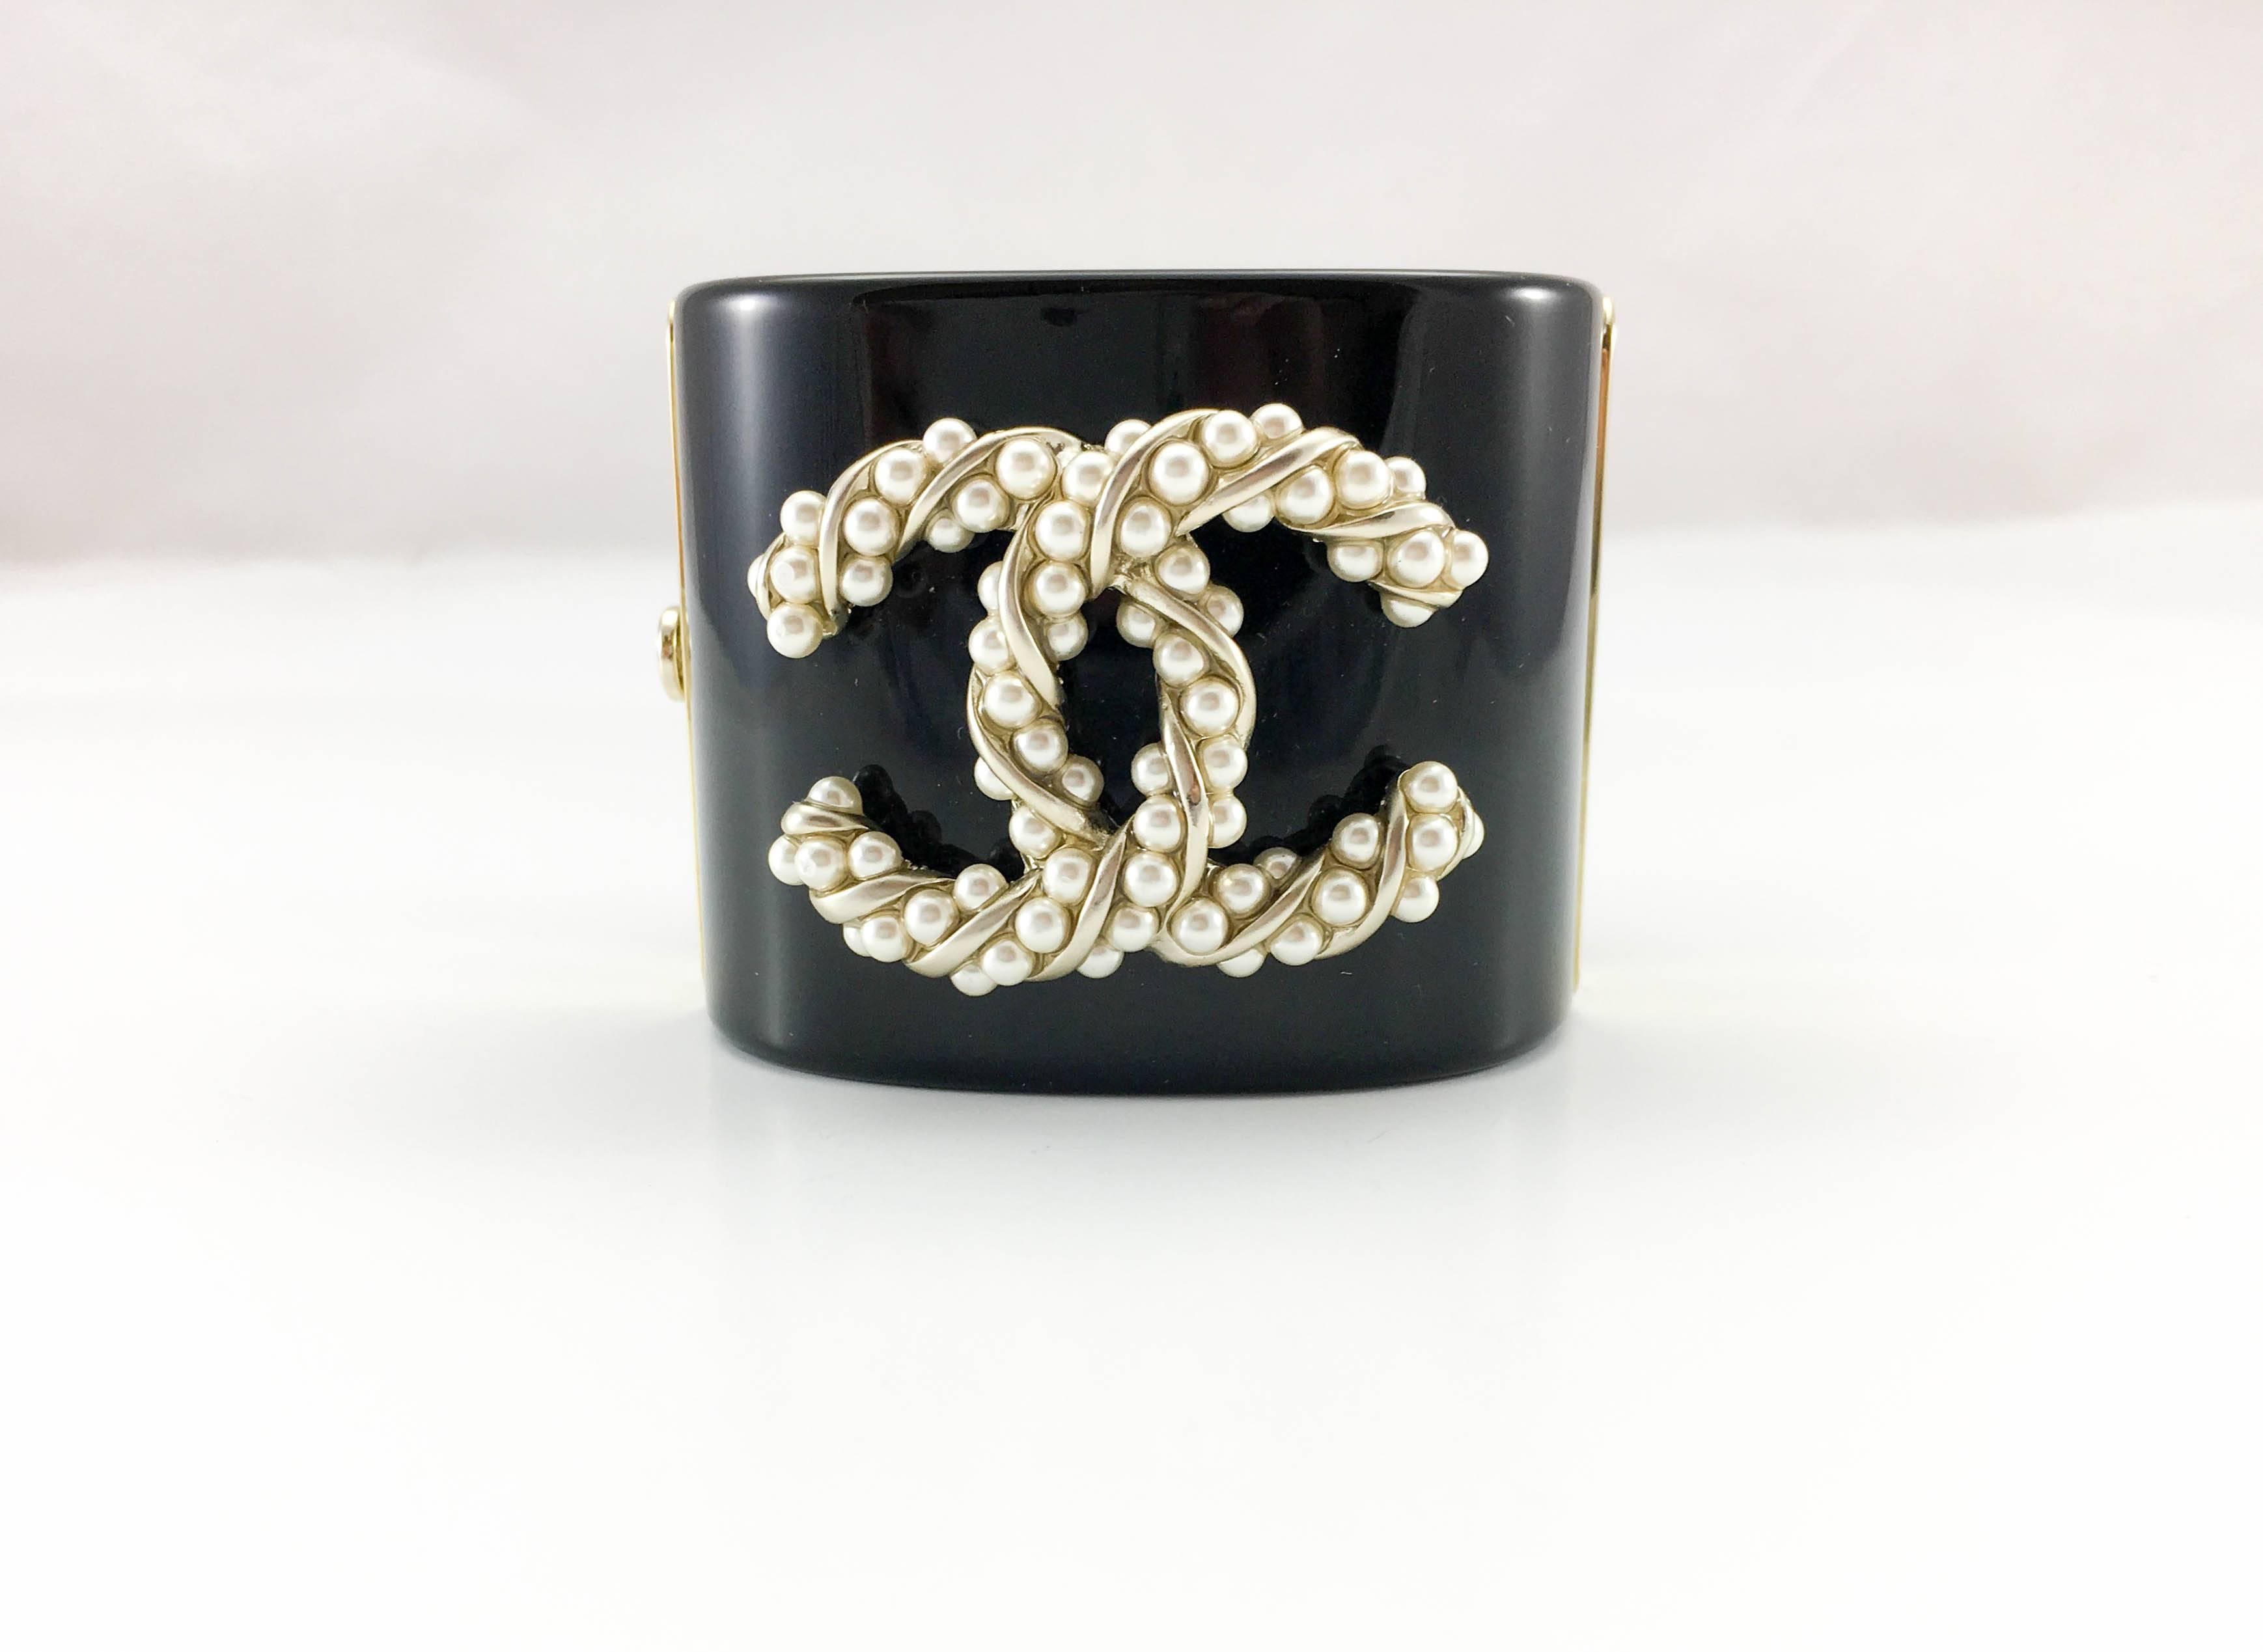 Striking Chanel Pearl Logo Cuff Bracelet. This beautiful piece by Chanel was crafted for the 2015 Autumn / Winter Collection. The black resin cuff is adorned with a large, baroque-style pearl logo, a recurrent theme at Chanel. The closure is by a